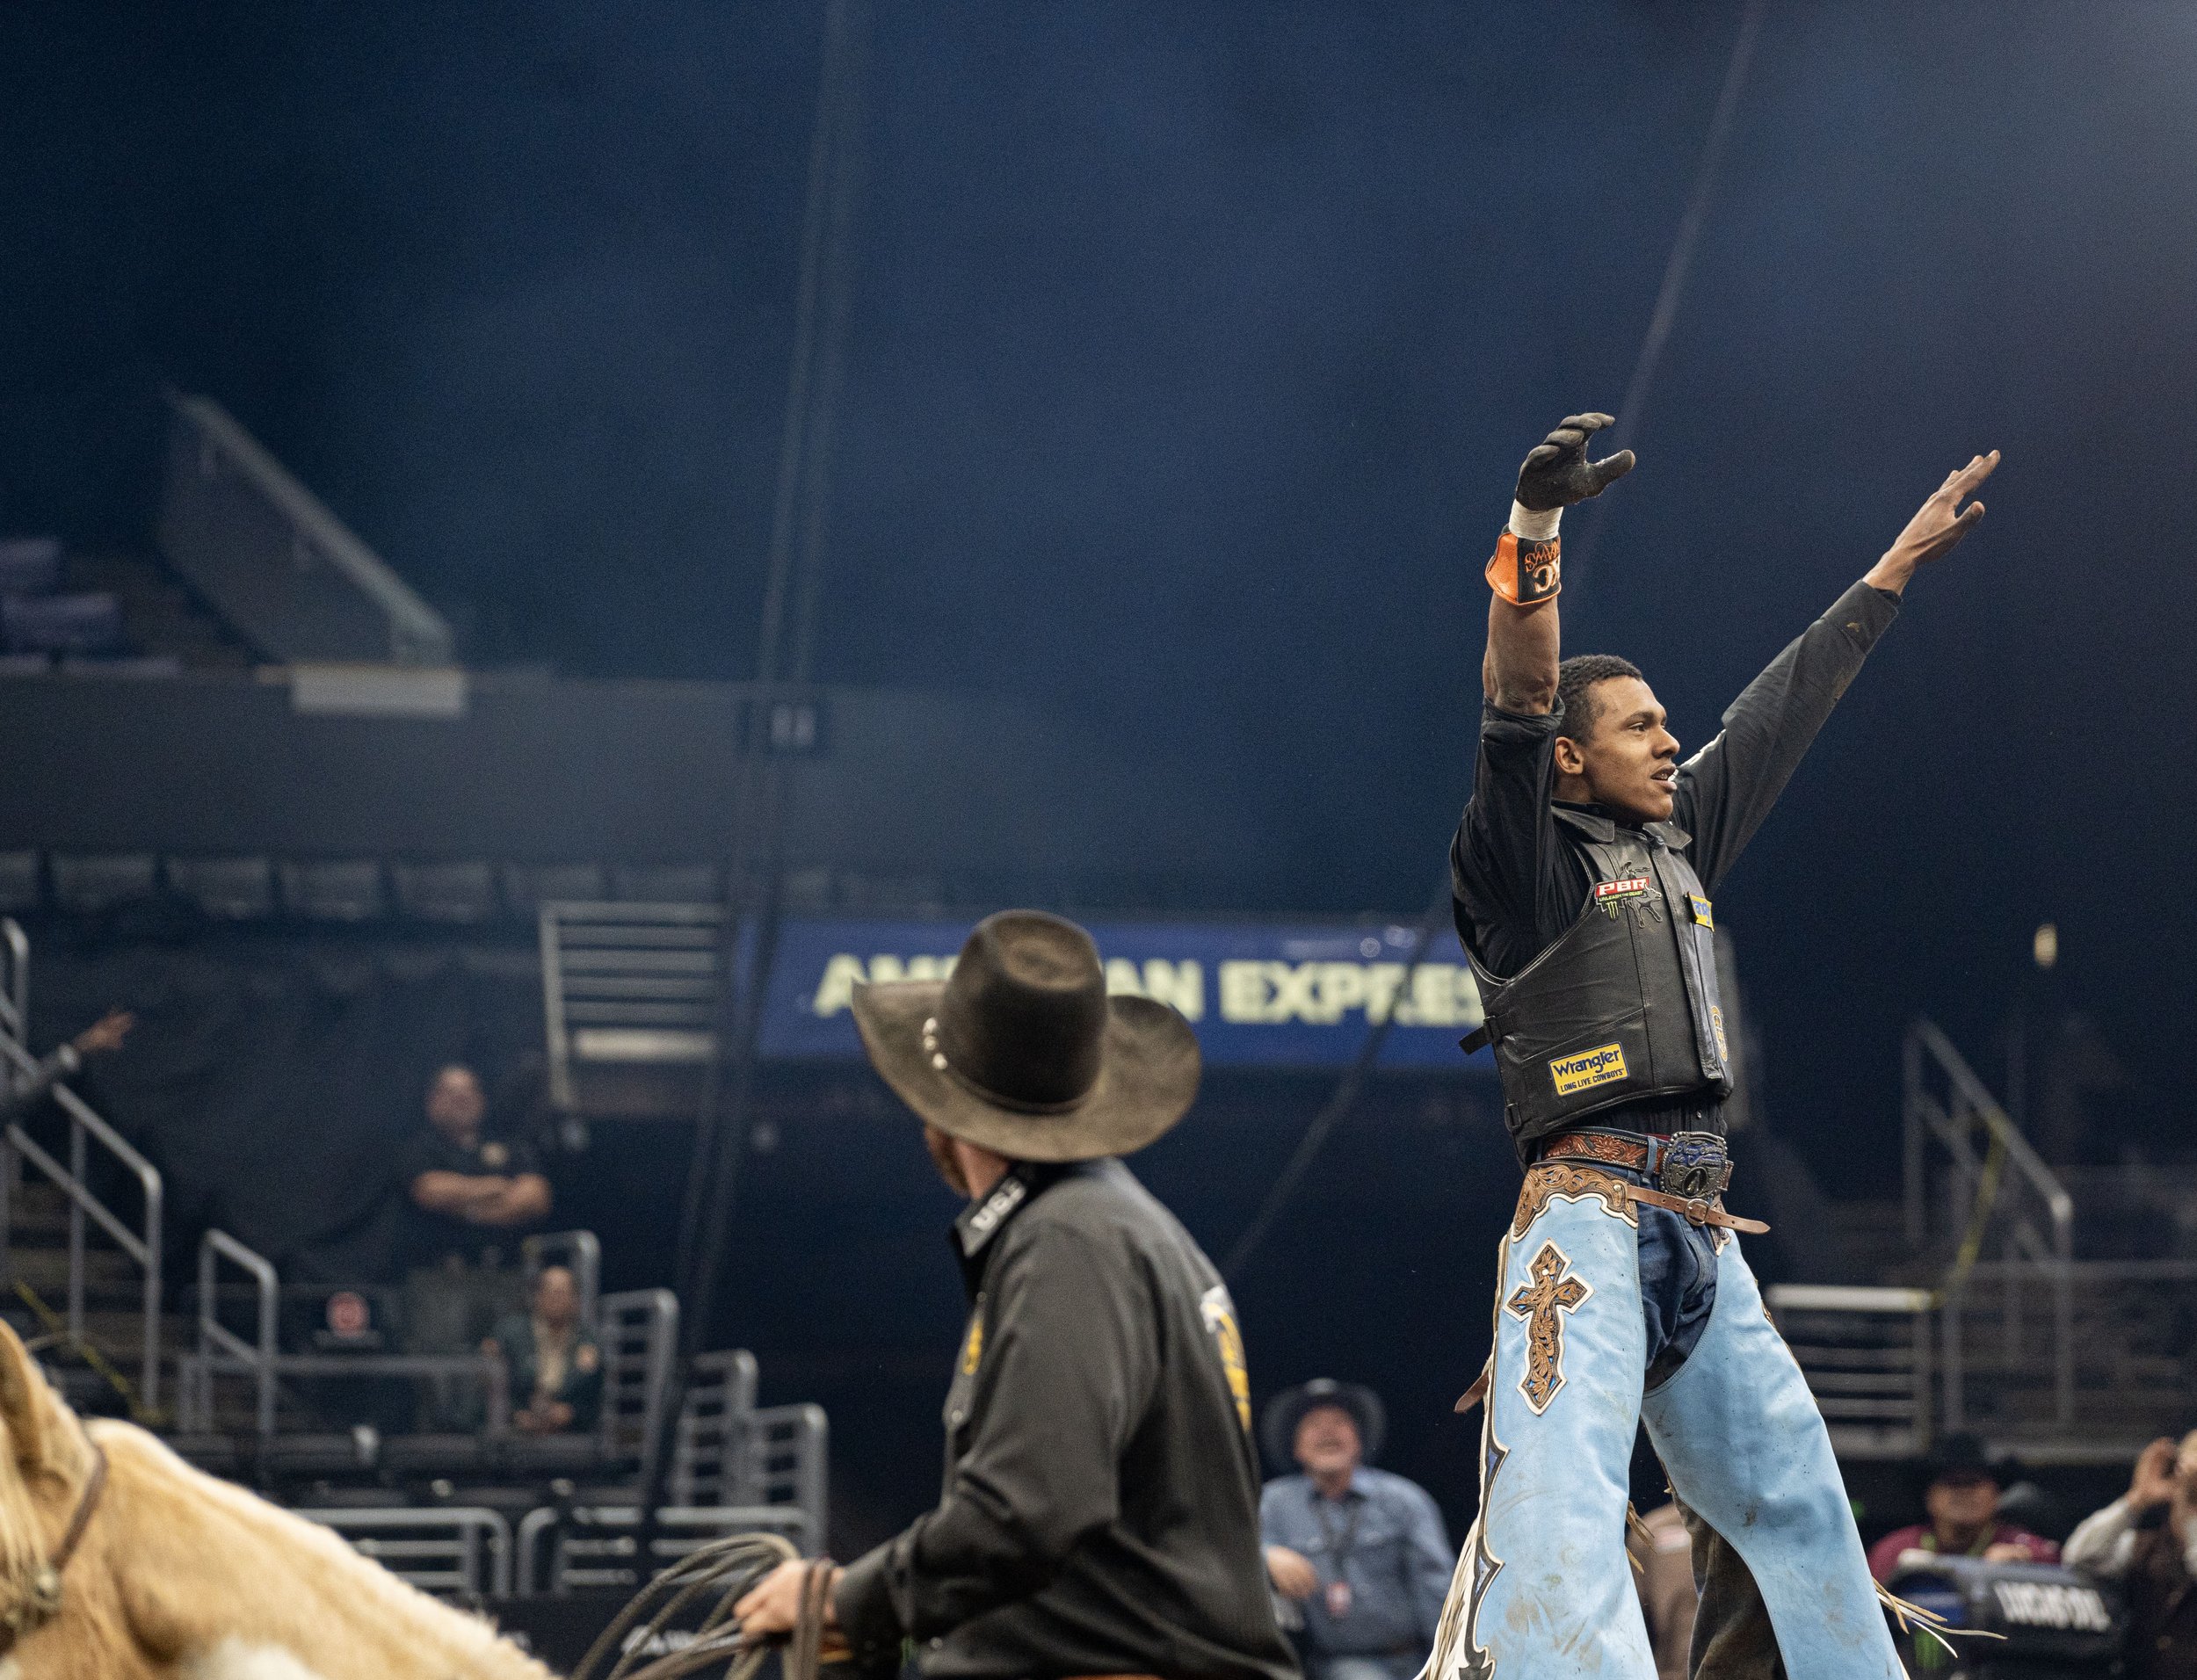  Cassio Dias celebrating as he finishes the biggest ride of his life against the best bull in the world, Man Hater, to reach first place in the Championship round on Saturday, Feb. 16, 2023. Dias is currently the best bull rider in the world and did 